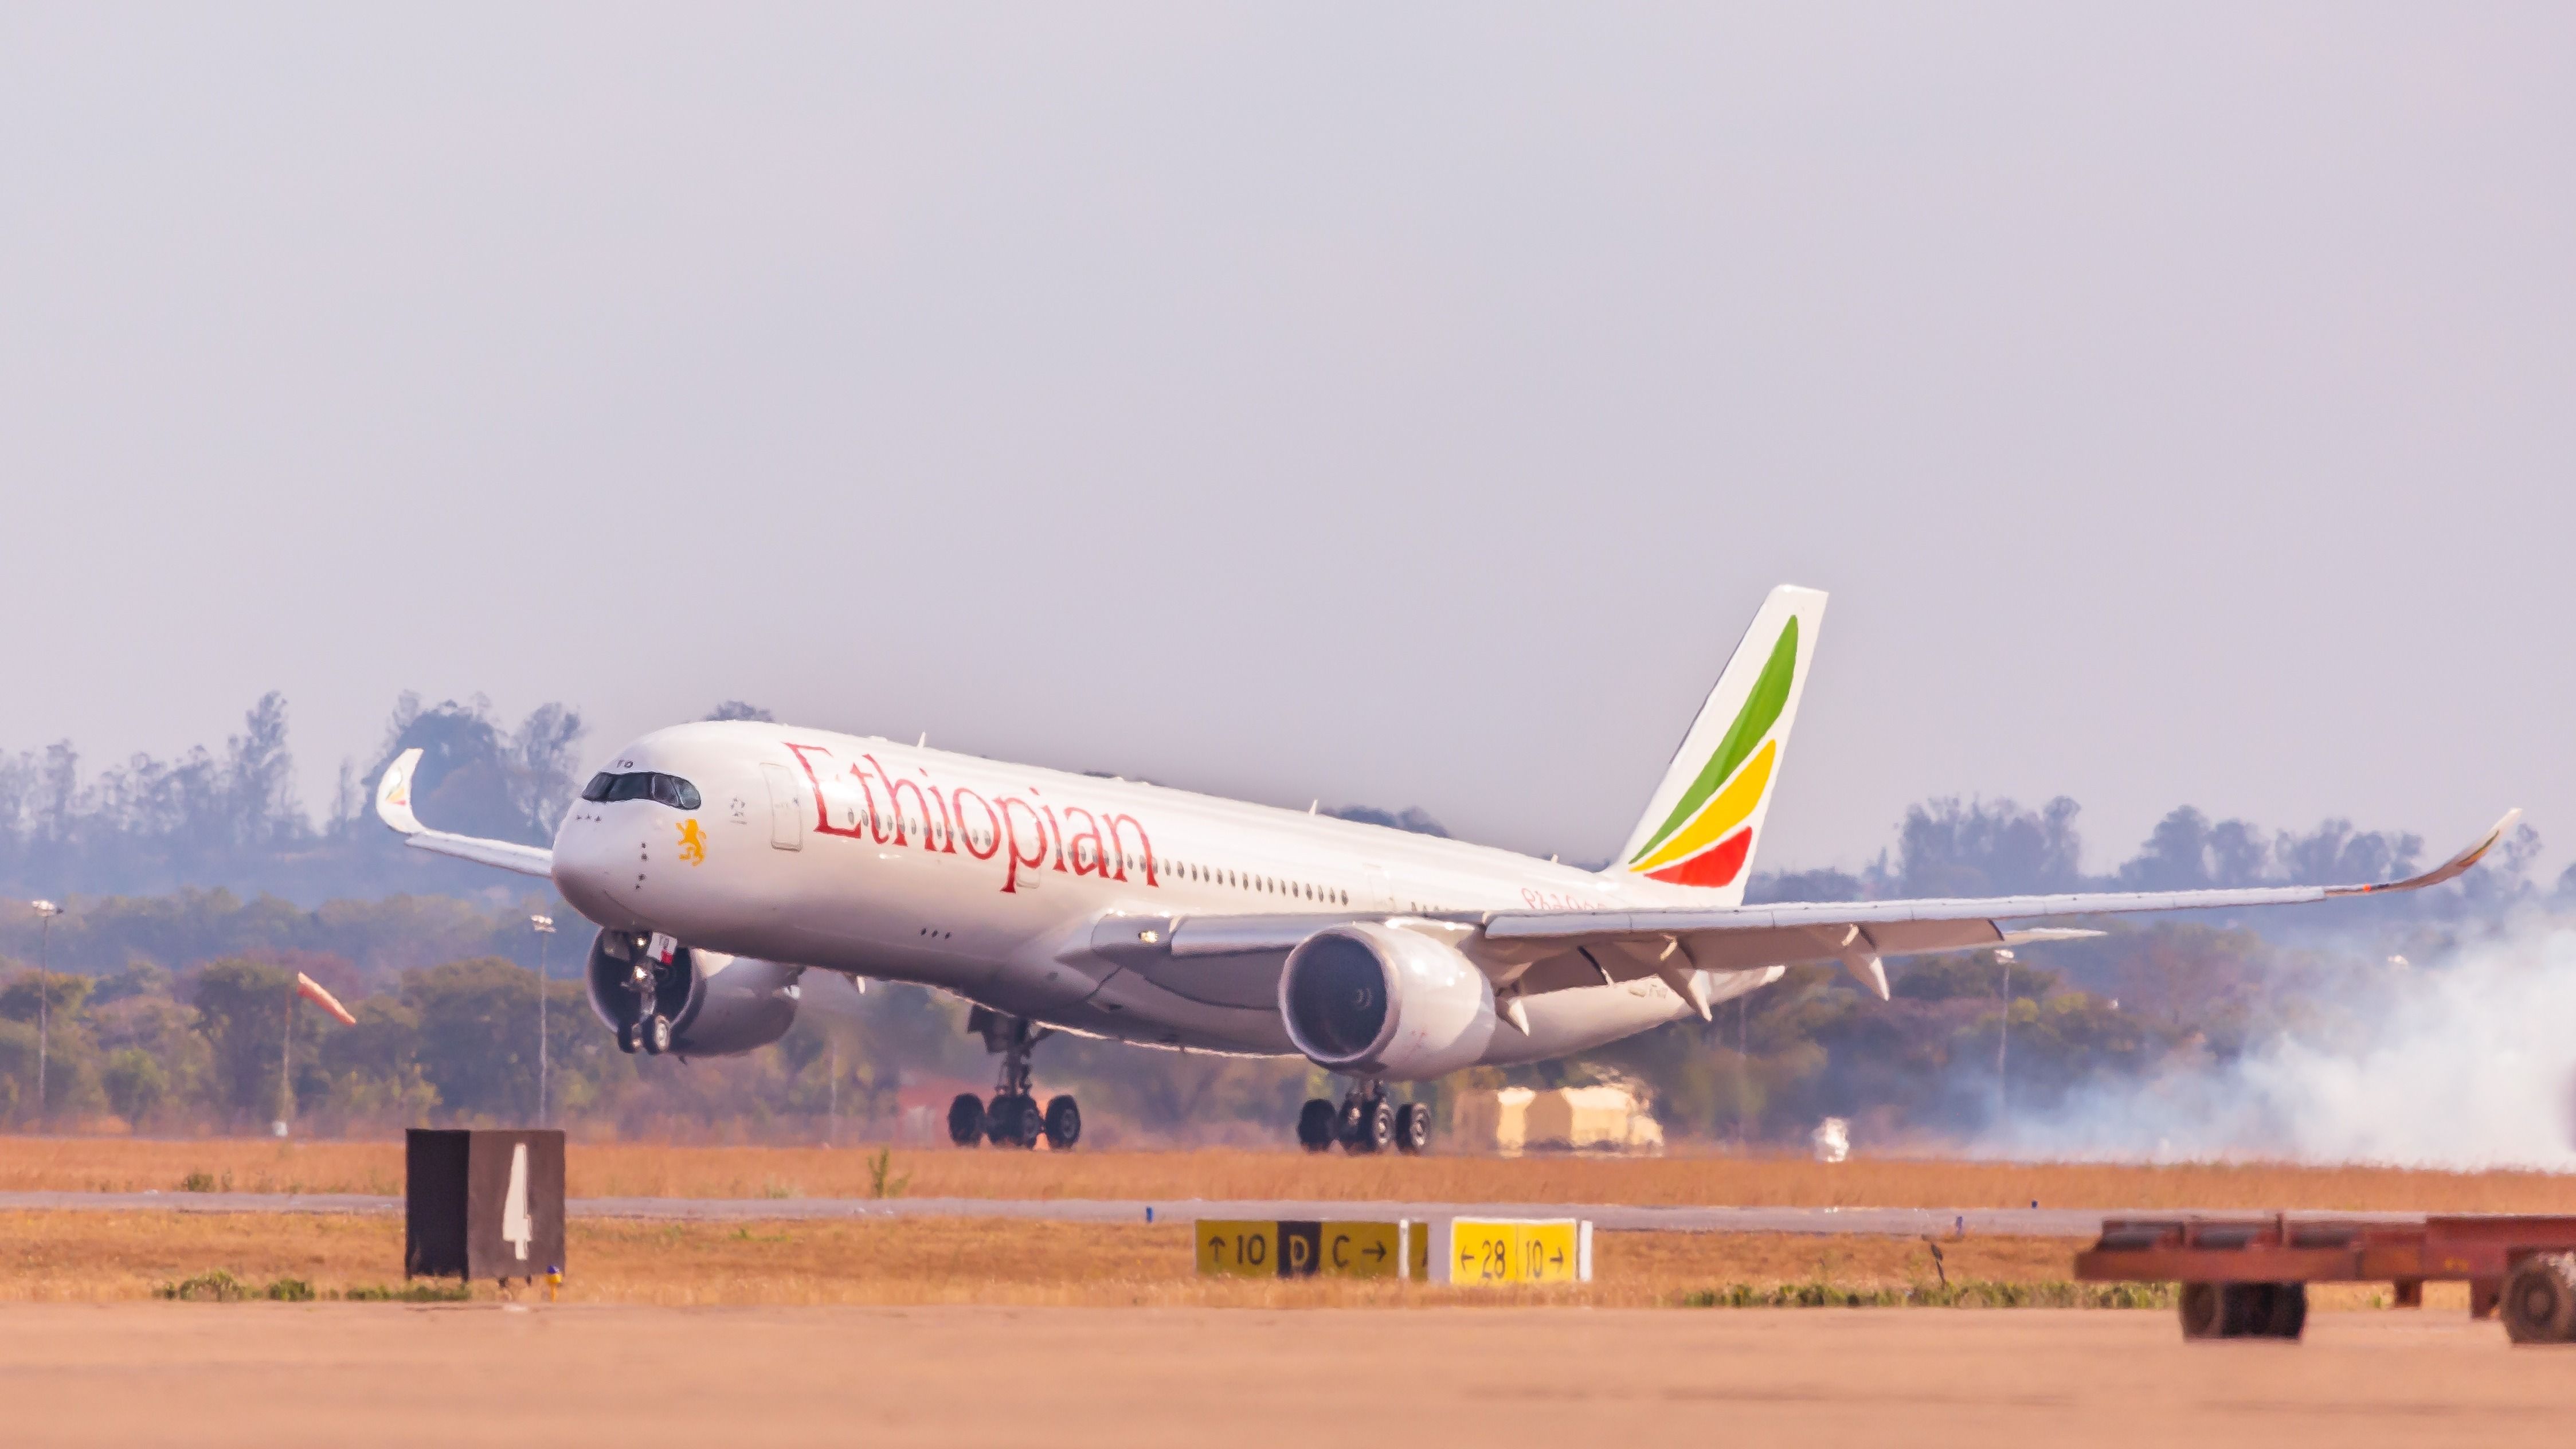 Ethiopian Airlines A350-900 taking off from Zambia